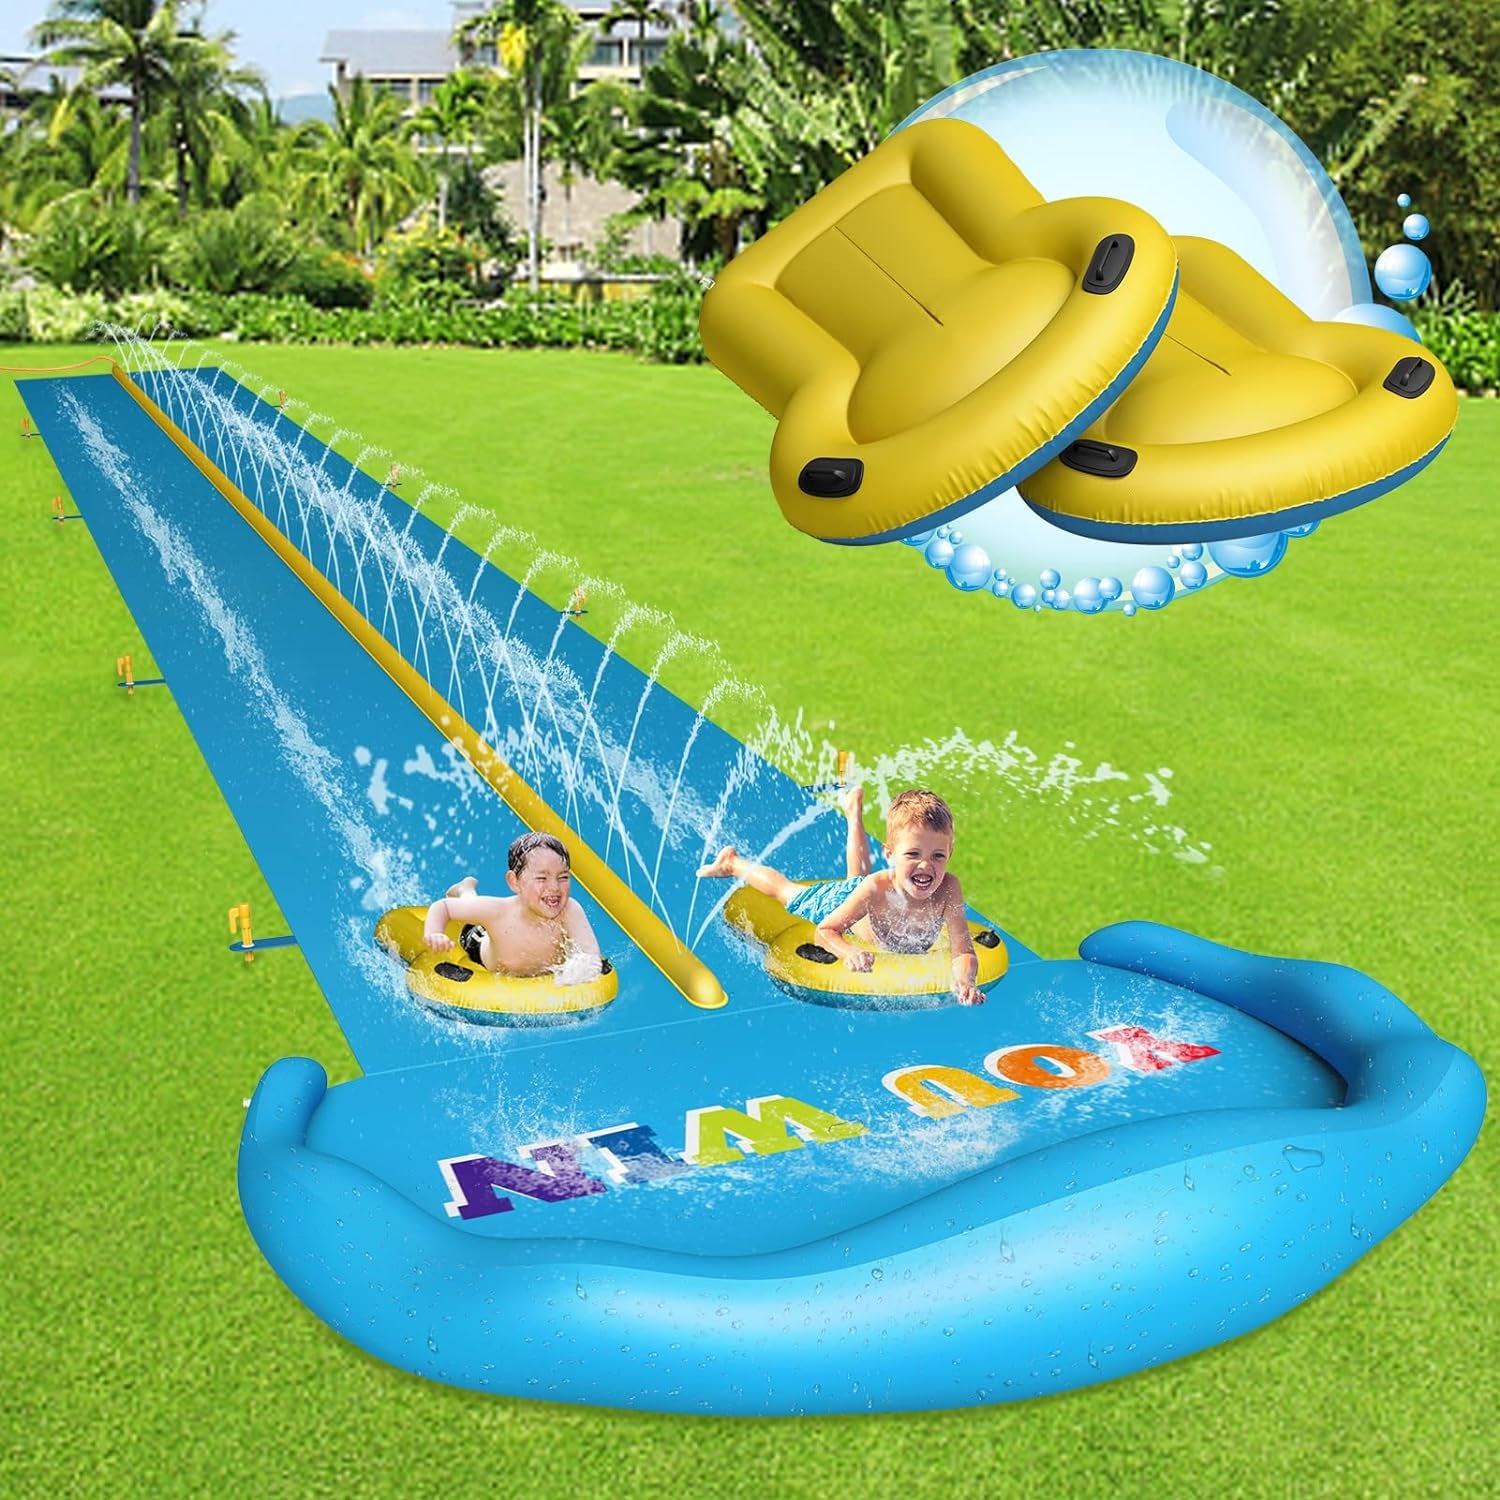 Water Slide, 32.8Ft Inflatable Splash Water Slip with 2 Racing Lanes and 2 Body Boards for Kids Boys Girls Adults, Water Slide Outdoor Water Toys for Backyard Garden